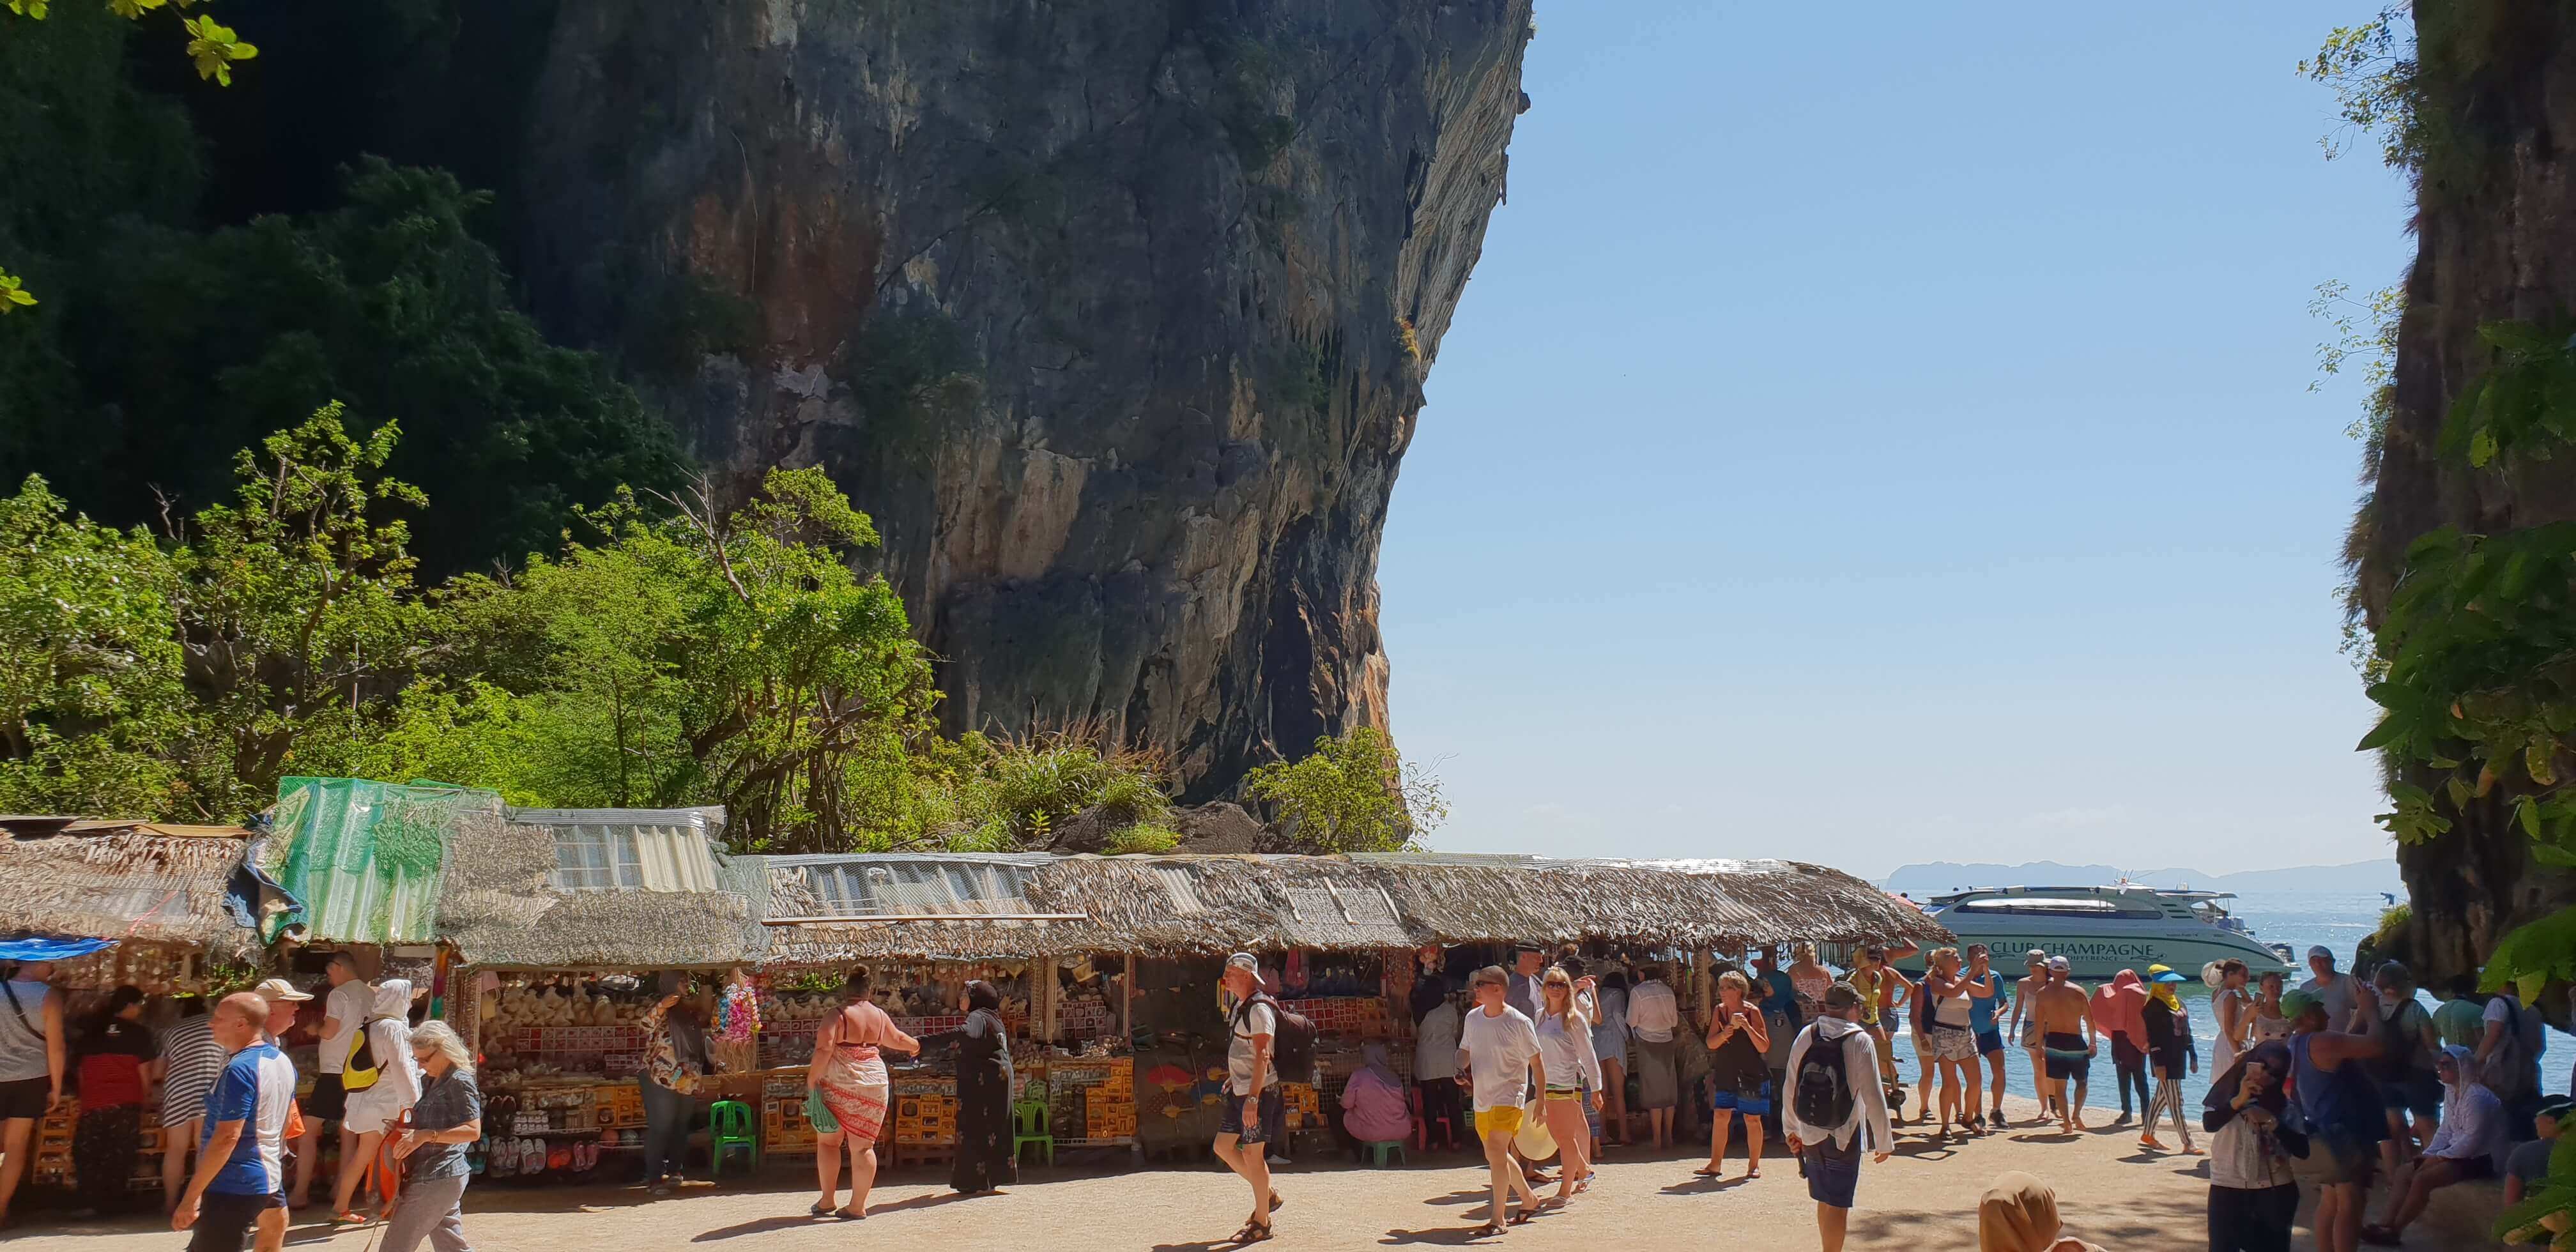 A line of shops at the James Bond Island